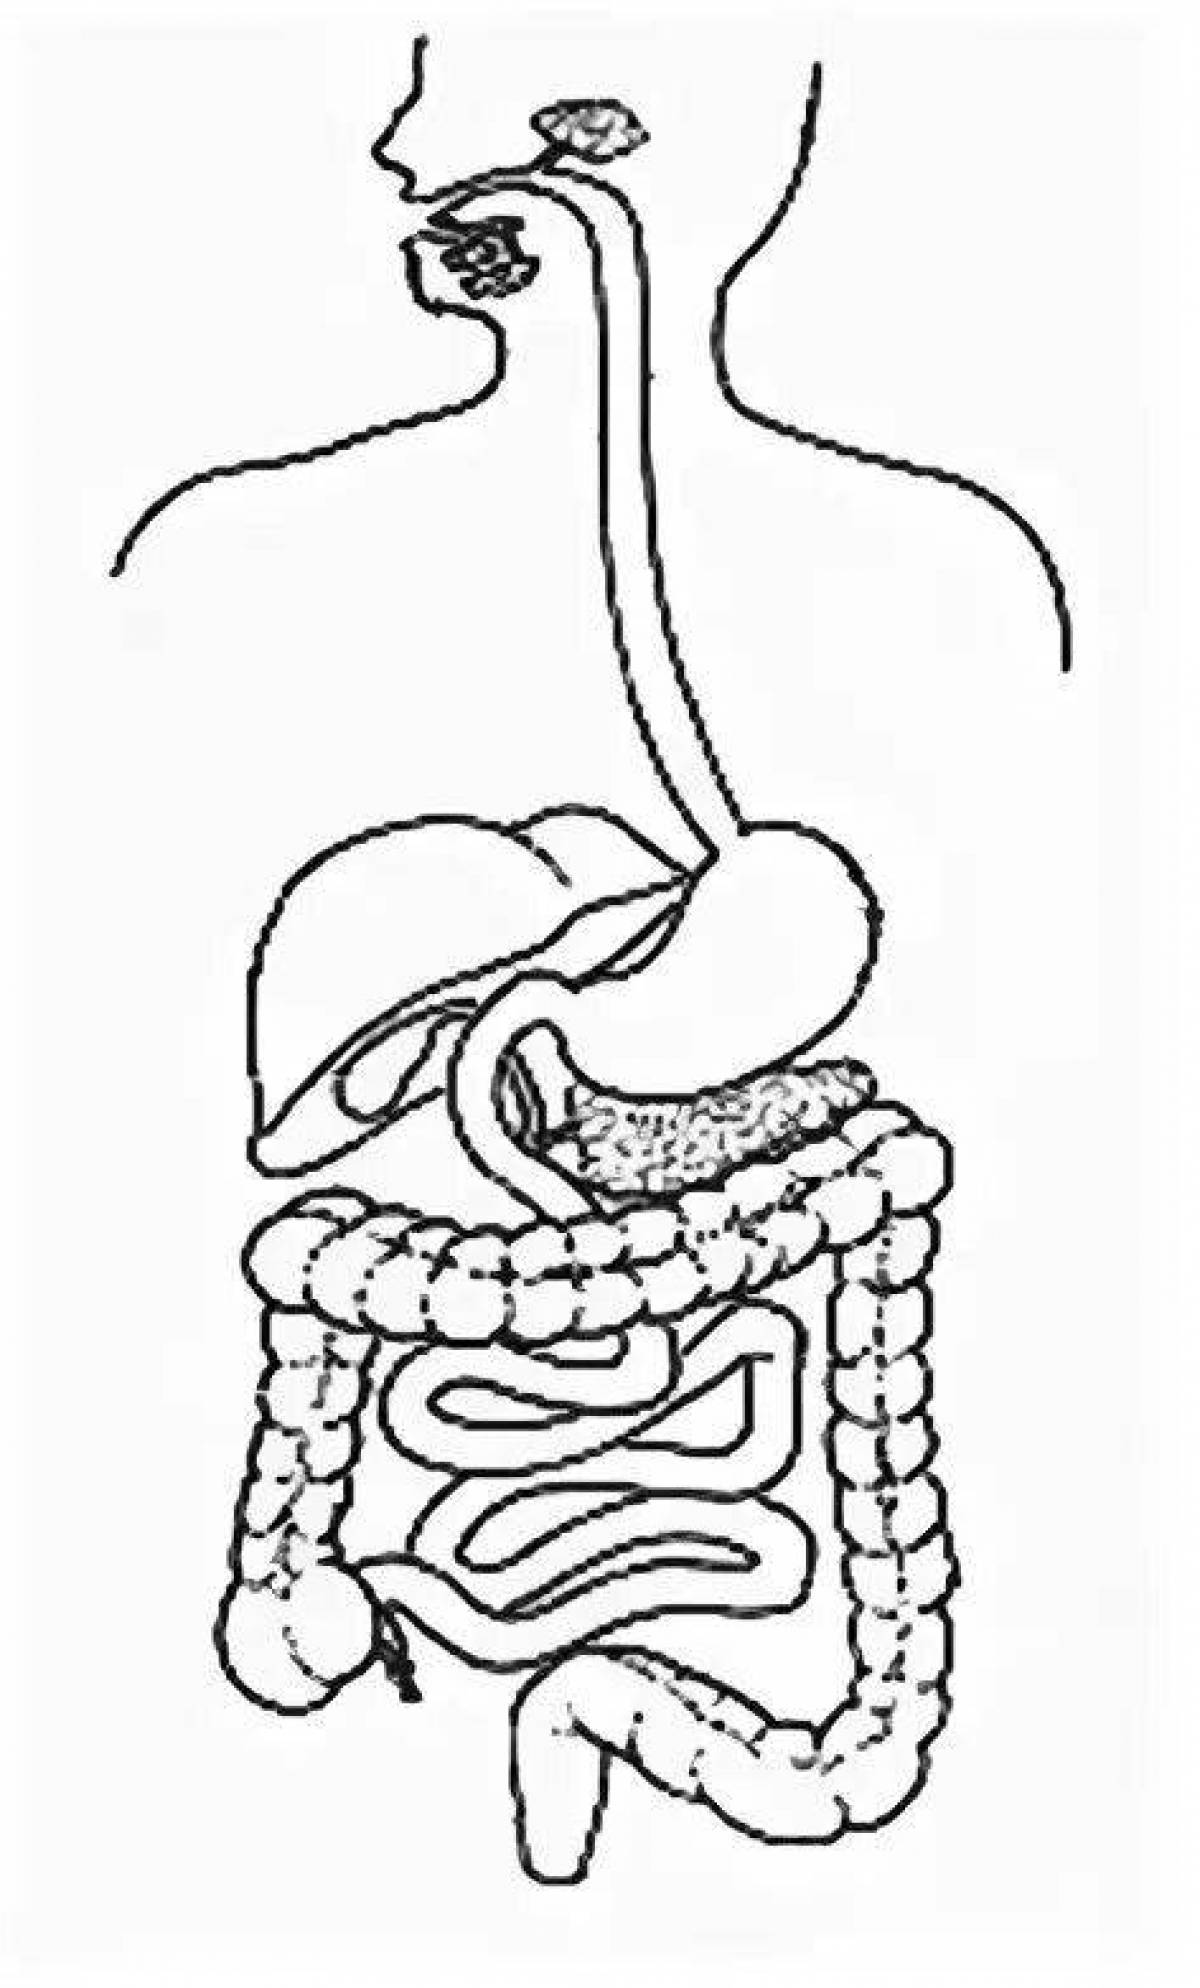 Coloring book bright digestive system